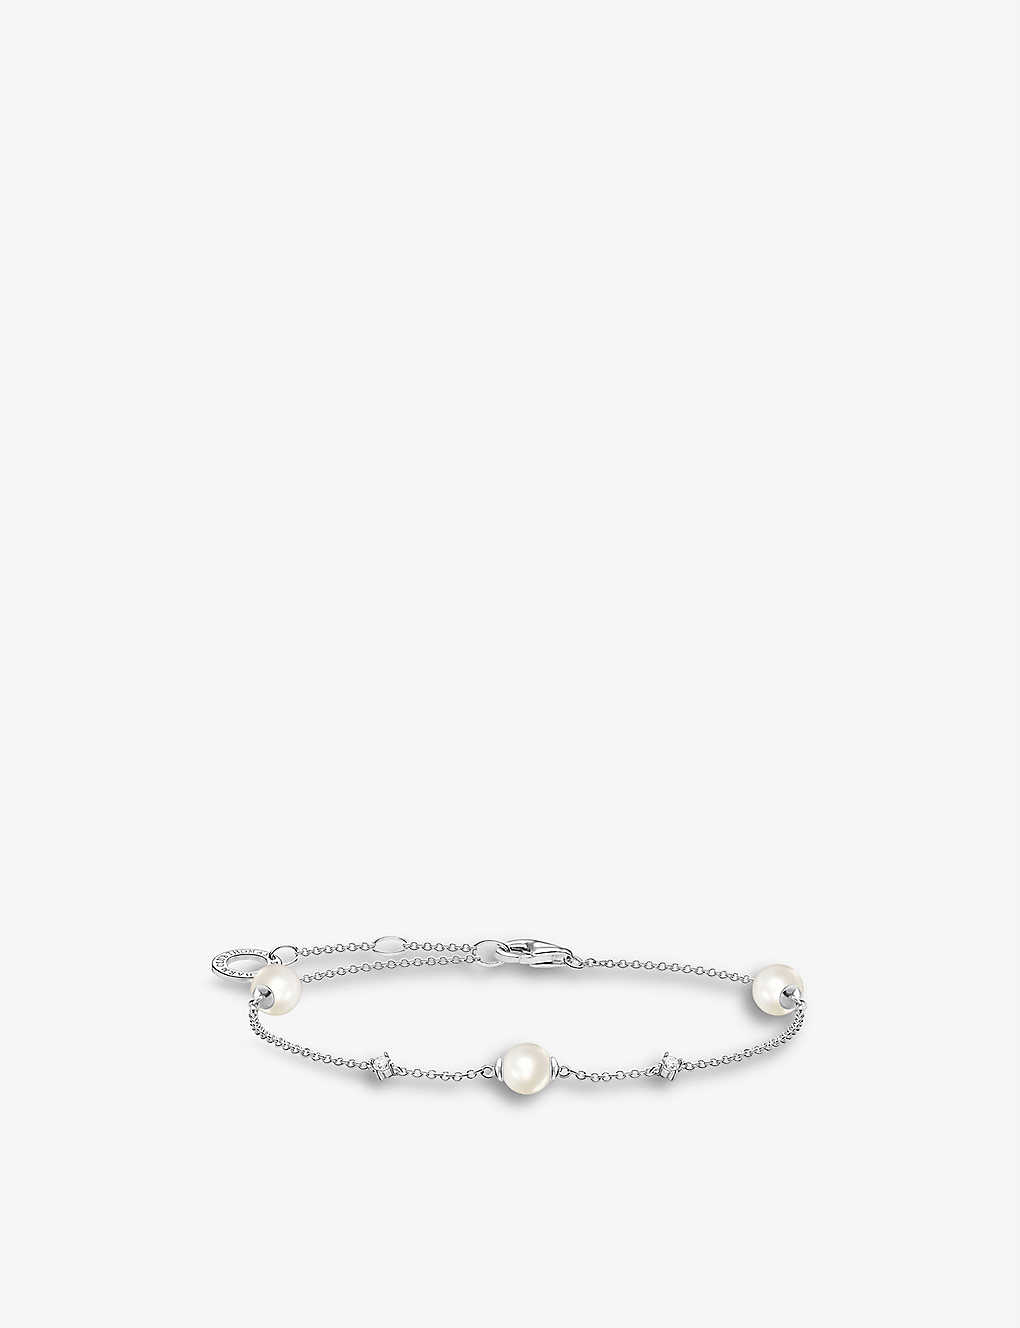 Thomas Sabo Women's White Sterling Silver, Cubic Zirconia And Freshwater Pearl Bracelet